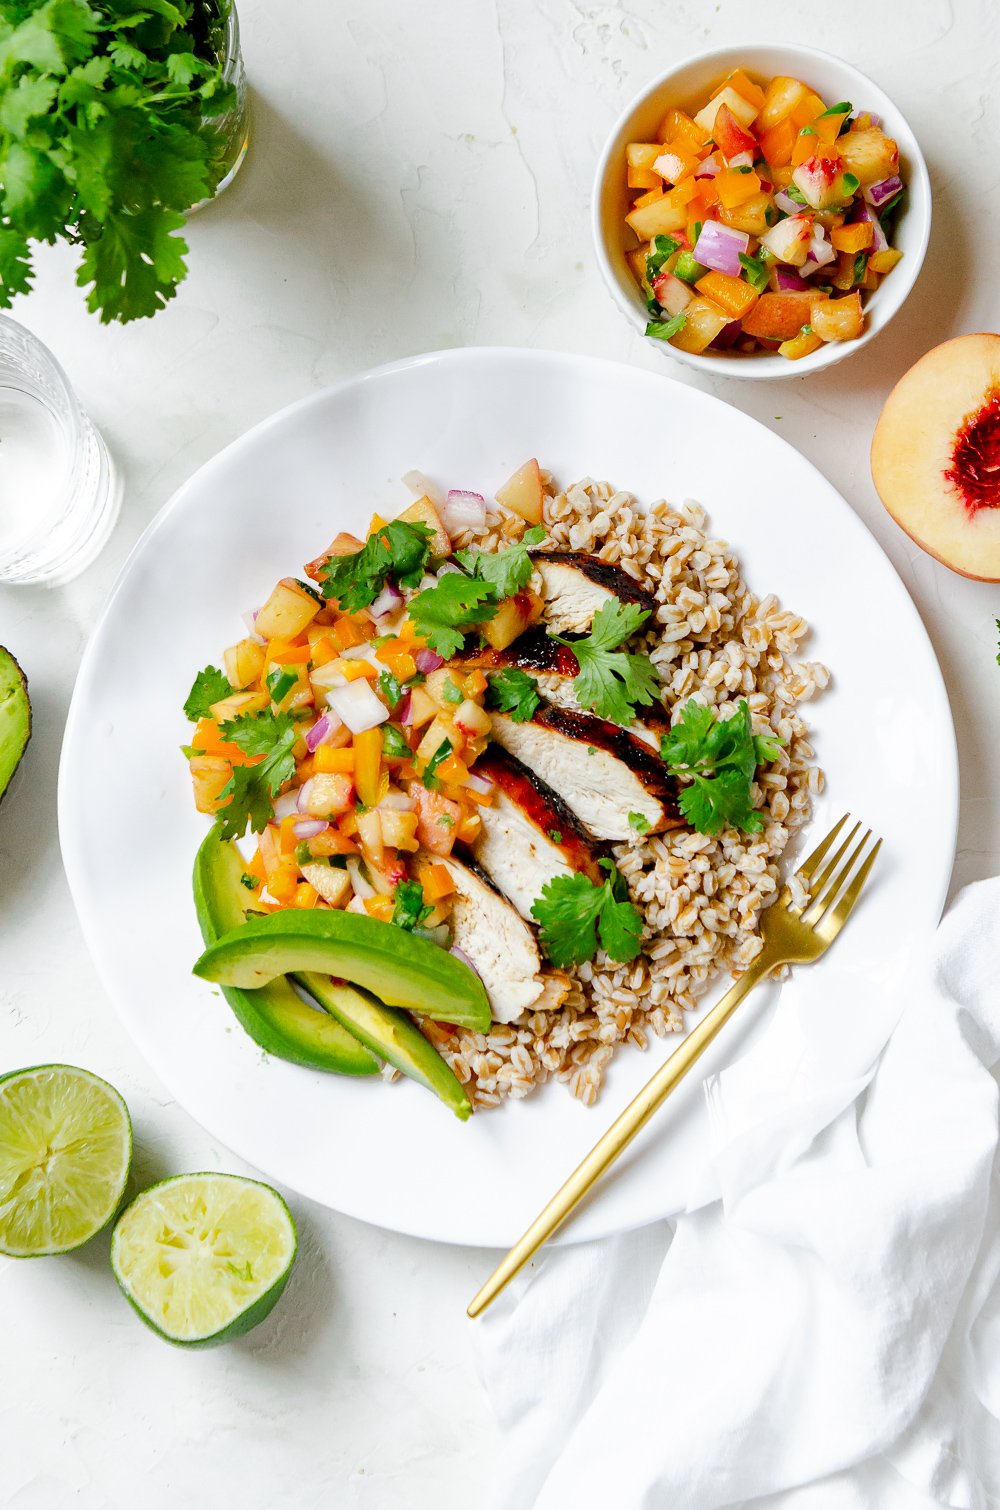 Plate of grilled chicken over farro, topped with a peach salsa made from peaches, yellow bell pepper, red onion, jalapeño and cilantro. Dish is surrounded by ingredients such as cilantro, limes and the salsa.